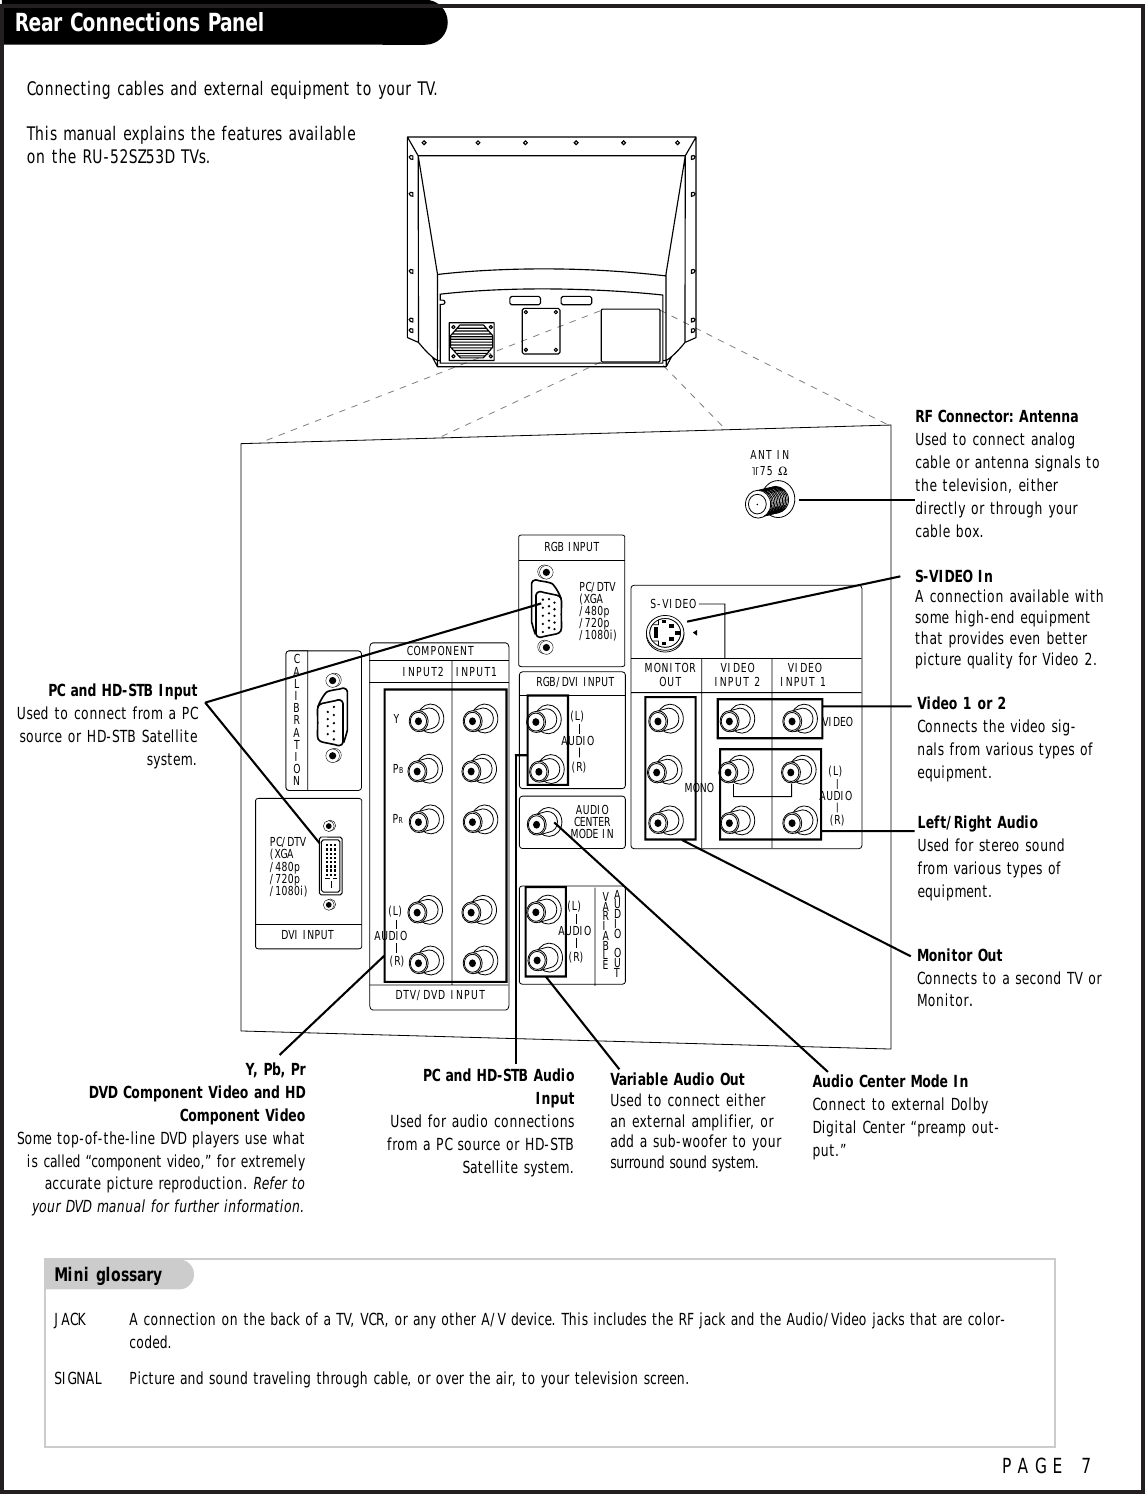 Rear Connections PanelPAGE 7Mini glossary JACK  A connection on the back of a TV, VCR, or any other A/V device. This includes the RF jack and the Audio/Video jacks that are color-coded.SIGNAL Picture and sound traveling through cable, or over the air, to your television screen.CALIBRATIONPC/DTV(XGA/480p/720p/1080i)AUDIOCENTERMODE INPR DVI INPUTDTV/DVD INPUTCOMPONENTINPUT2 INPUT1PBYPC/DTV(XGA/480p/720p/1080i)RGB INPUTRGB/DVI INPUT(R)(L) AUDIO (R)(L) AUDIO (R)(L) AUDIO VARIABLEAUDIOOUTMONITOROUT VIDEOINPUT 2 VIDEO INPUT 1S-VIDEO(R)(L) AUDIO VIDEOMONO+75 Ω ANT INS-VIDEO In A connection available withsome high-end equipmentthat provides even betterpicture quality for Video 2.Variable Audio Out Used to connect eitheran external amplifier, oradd a sub-woofer to yoursurround sound system.RF Connector: AntennaUsed to connect analogcable or antenna signals tothe television, eitherdirectly or through yourcable box. Video 1 or 2Connects the video sig-nals from various types ofequipment.Y, Pb, PrDVD Component Video and HDComponent VideoSome top-of-the-line DVD players use whatis called “component video,”for extremelyaccurate picture reproduction. Refer toyour DVD manual for further information.Connecting cables and external equipment to your TV.This manual explains the features available on the RU-52SZ53D TVs.Monitor OutConnects to a second TV orMonitor.Left/Right Audio Used for stereo soundfrom various types ofequipment.PC and HD-STB InputUsed to connect from a PCsource or HD-STB Satellitesystem.PC and HD-STB AudioInputUsed for audio connectionsfrom a PC source or HD-STBSatellite system.Audio Center Mode InConnect to external DolbyDigital Center “preamp out-put.”